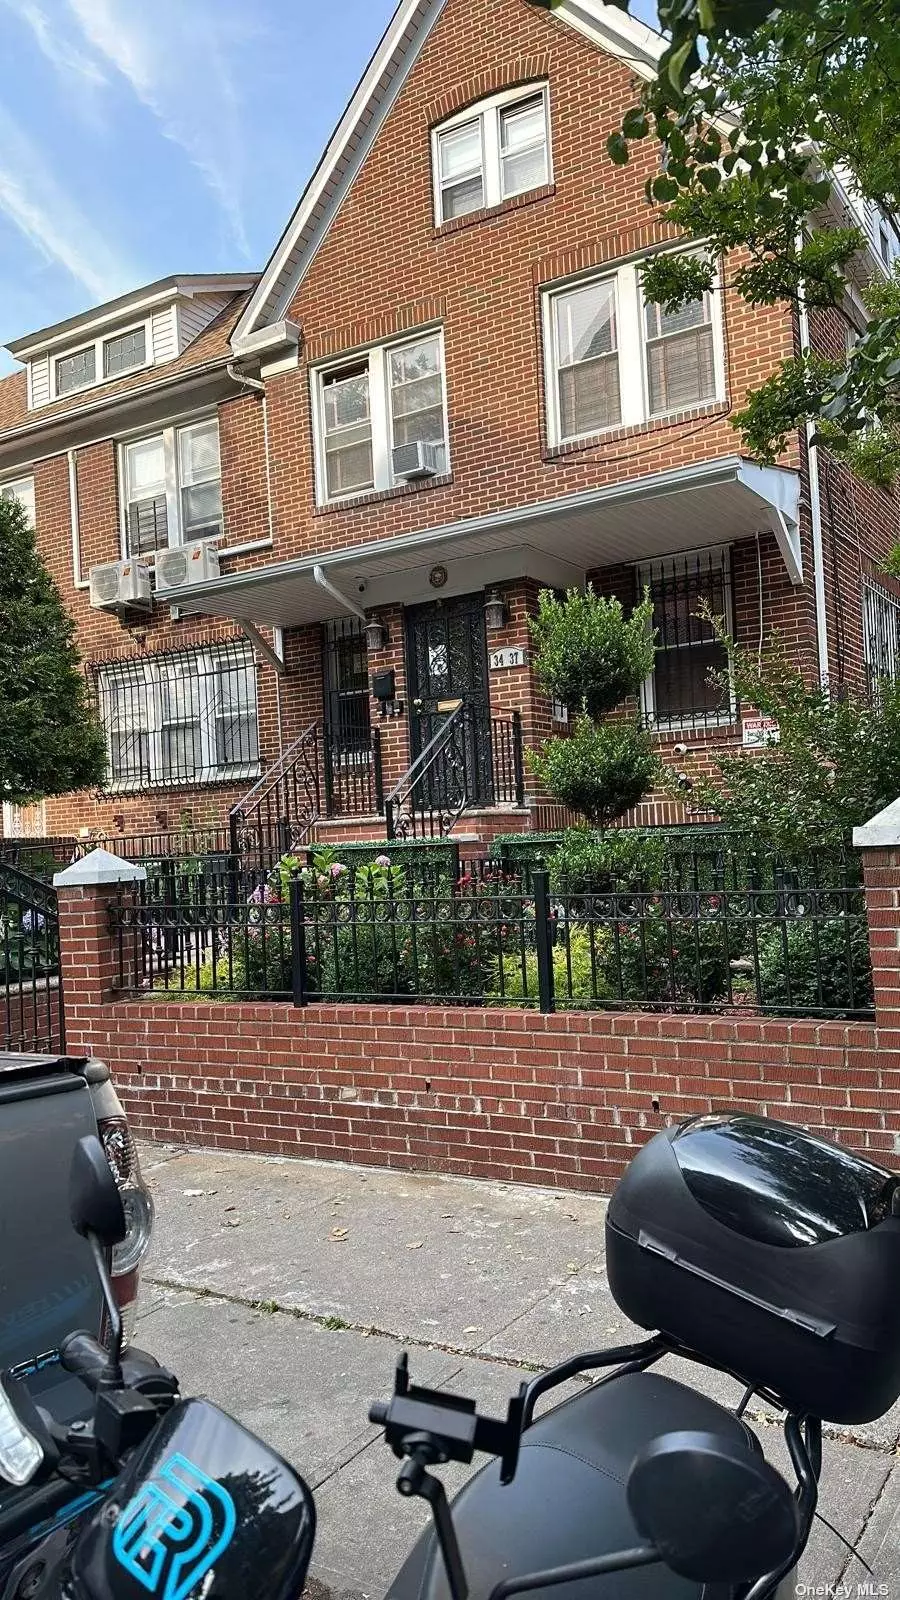 Huge One Dwelling Semi-Detached 4 Br, 3.5 Bath, Large Attic With Full Bath,  1 Garage, Private Driveway/ Large Patio, Laundry Room, The House Is Fully Fenced and Minutes To Station 7 Train Station At 90th St & Roosevelt Ave. Fully Renovated Finished Basement with Separated Entrance.